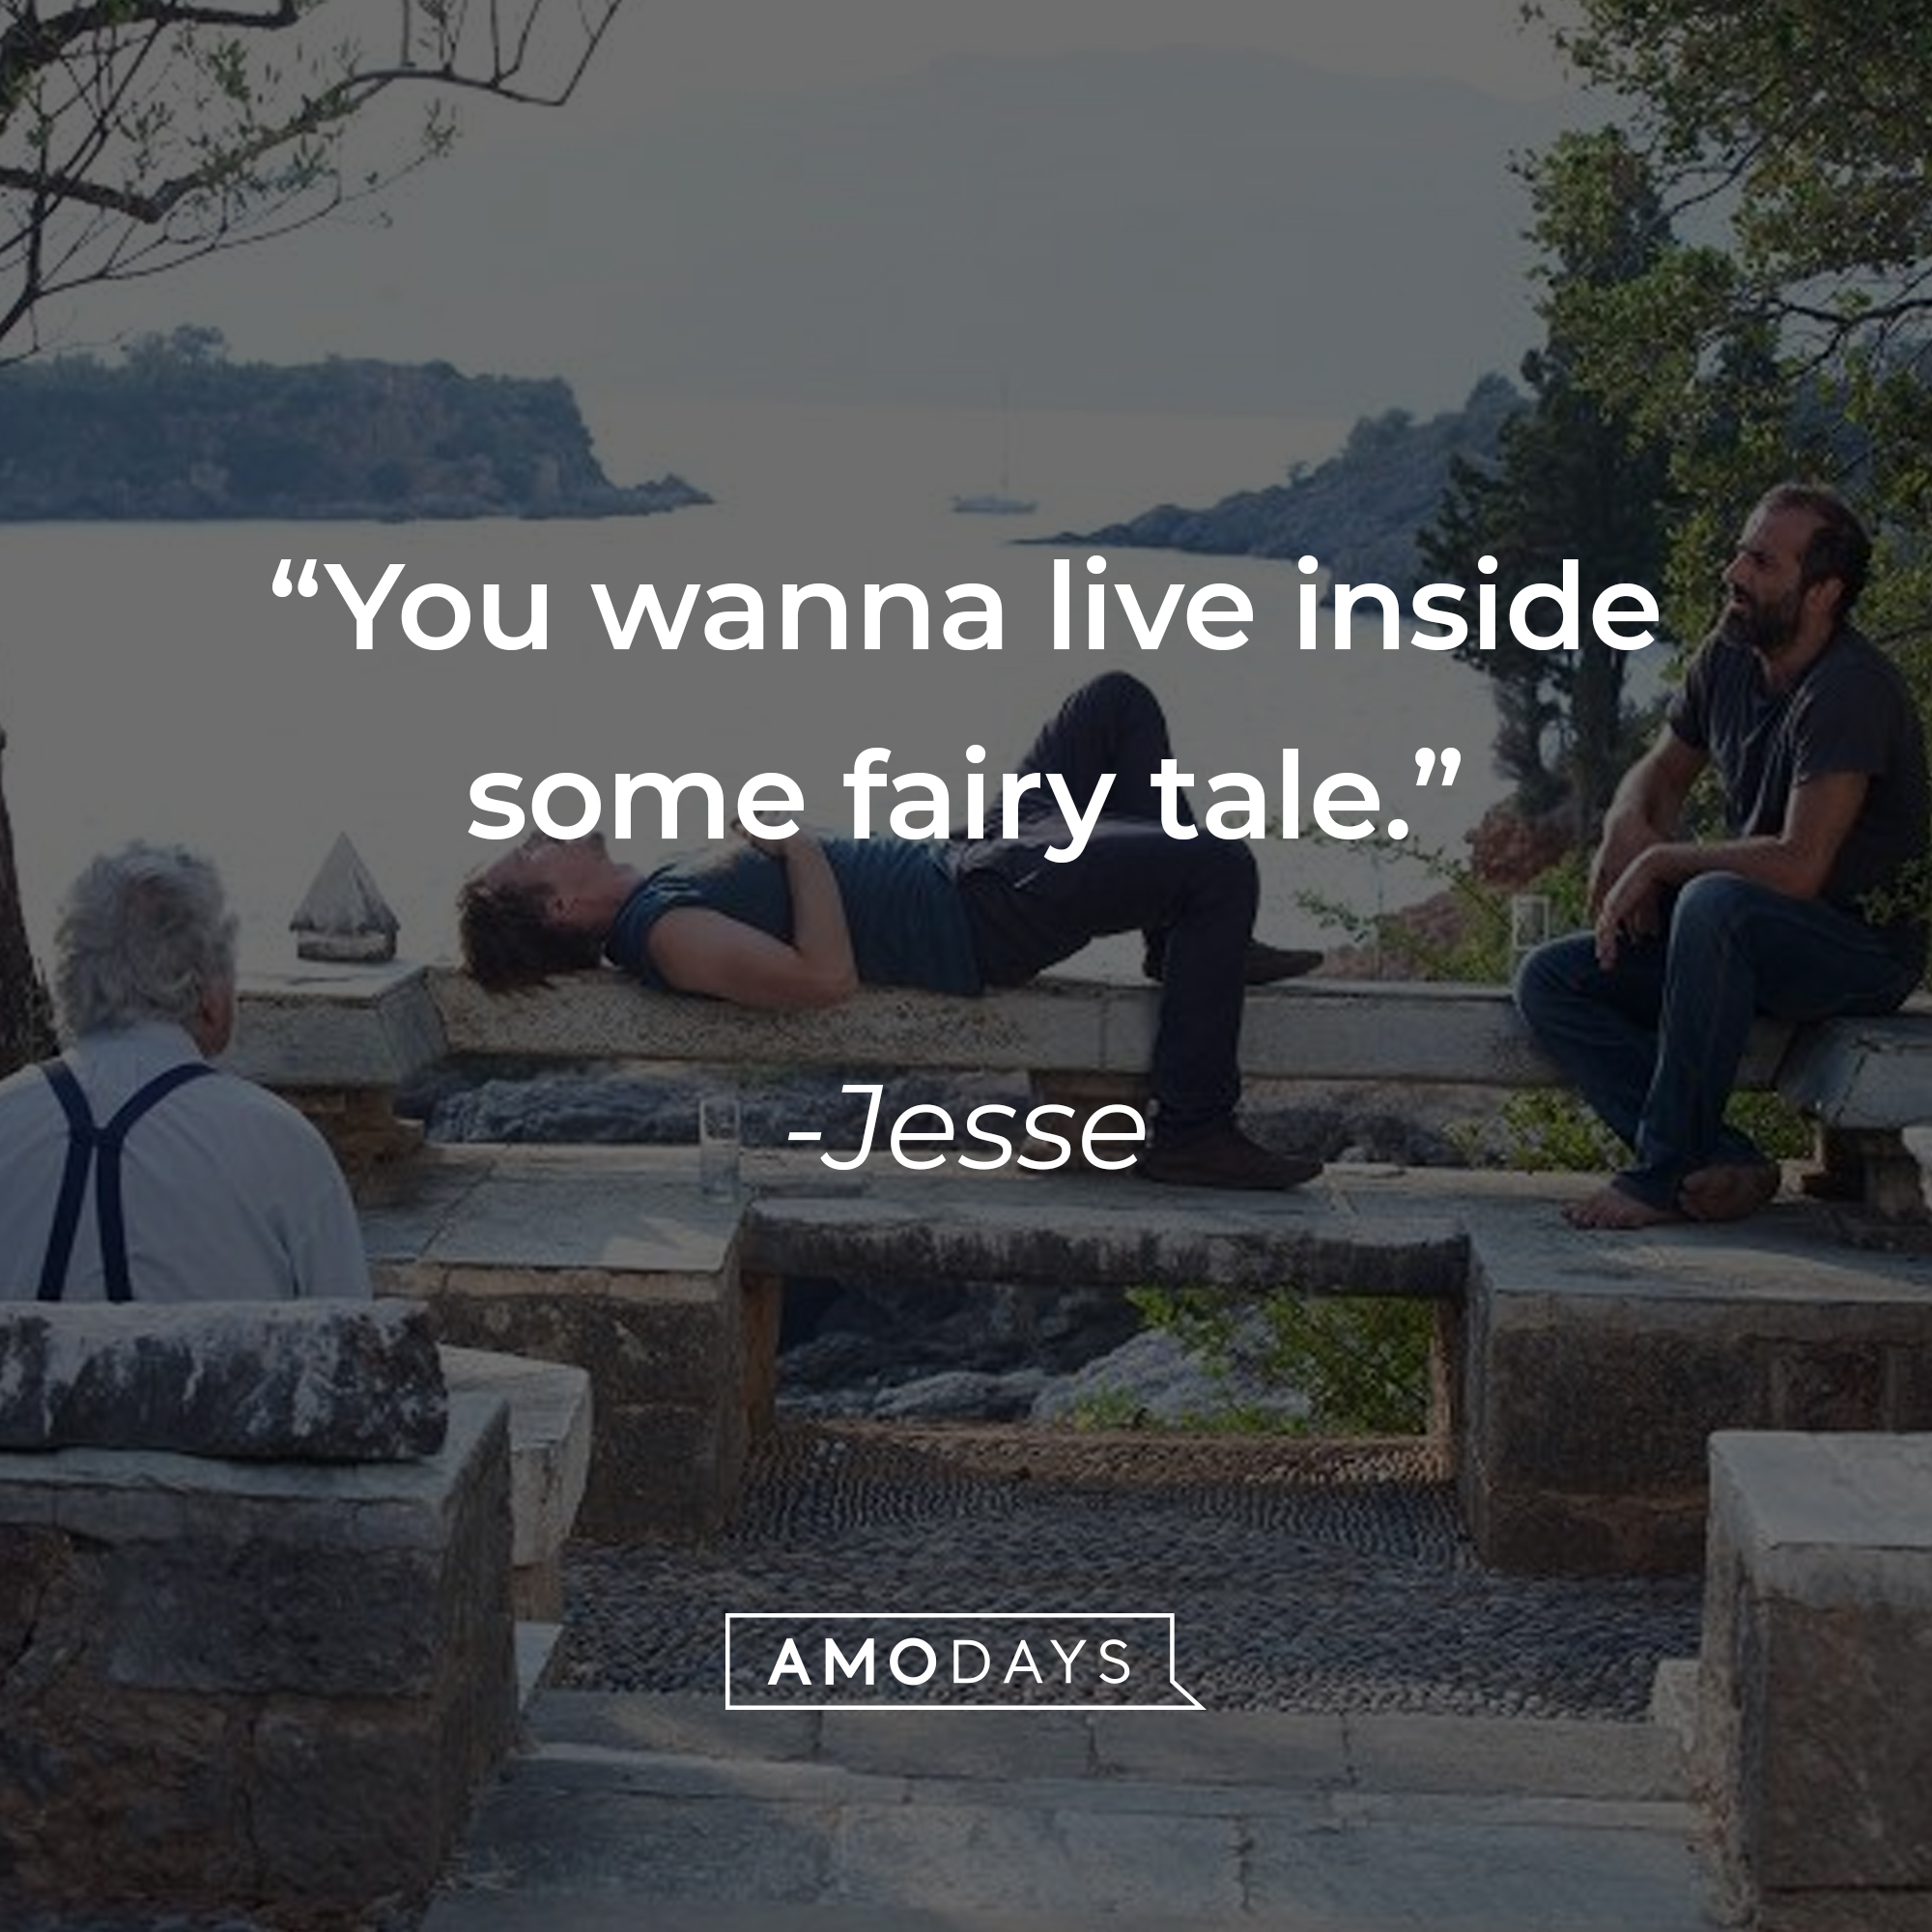 Jesse, with two other characters: “You wanna live inside some fairy tale." │Source: facebook.com/BeforeMidnightFilm